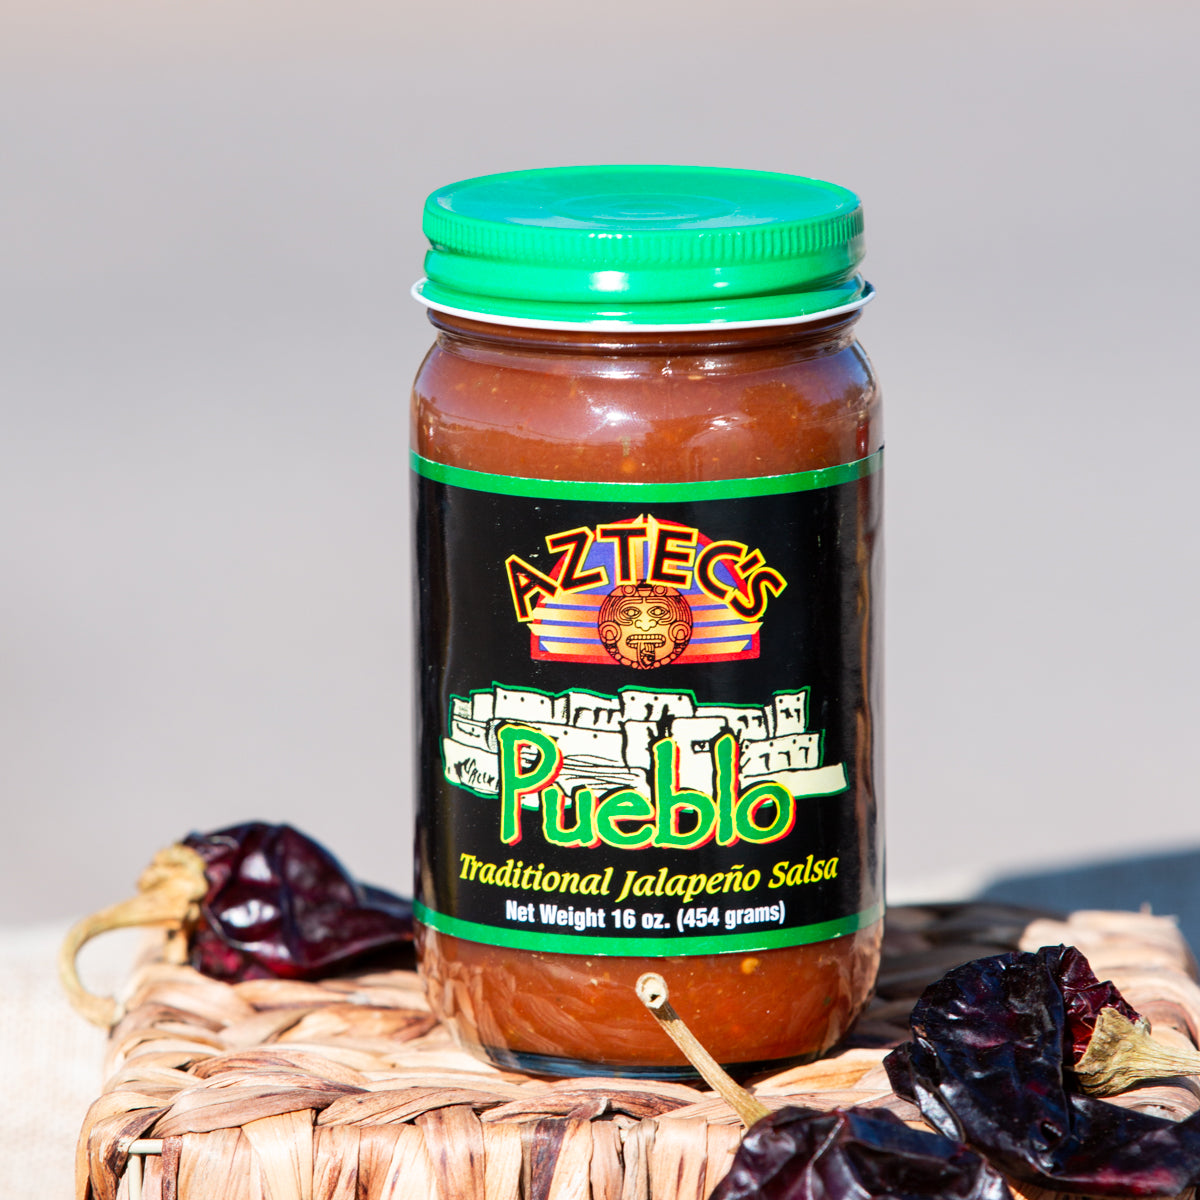 A jar of Salsa Sampler, part of a New Mexican Salsas variety pack, with a green lid and prominently labeled, sits on a wicker surface surrounded by